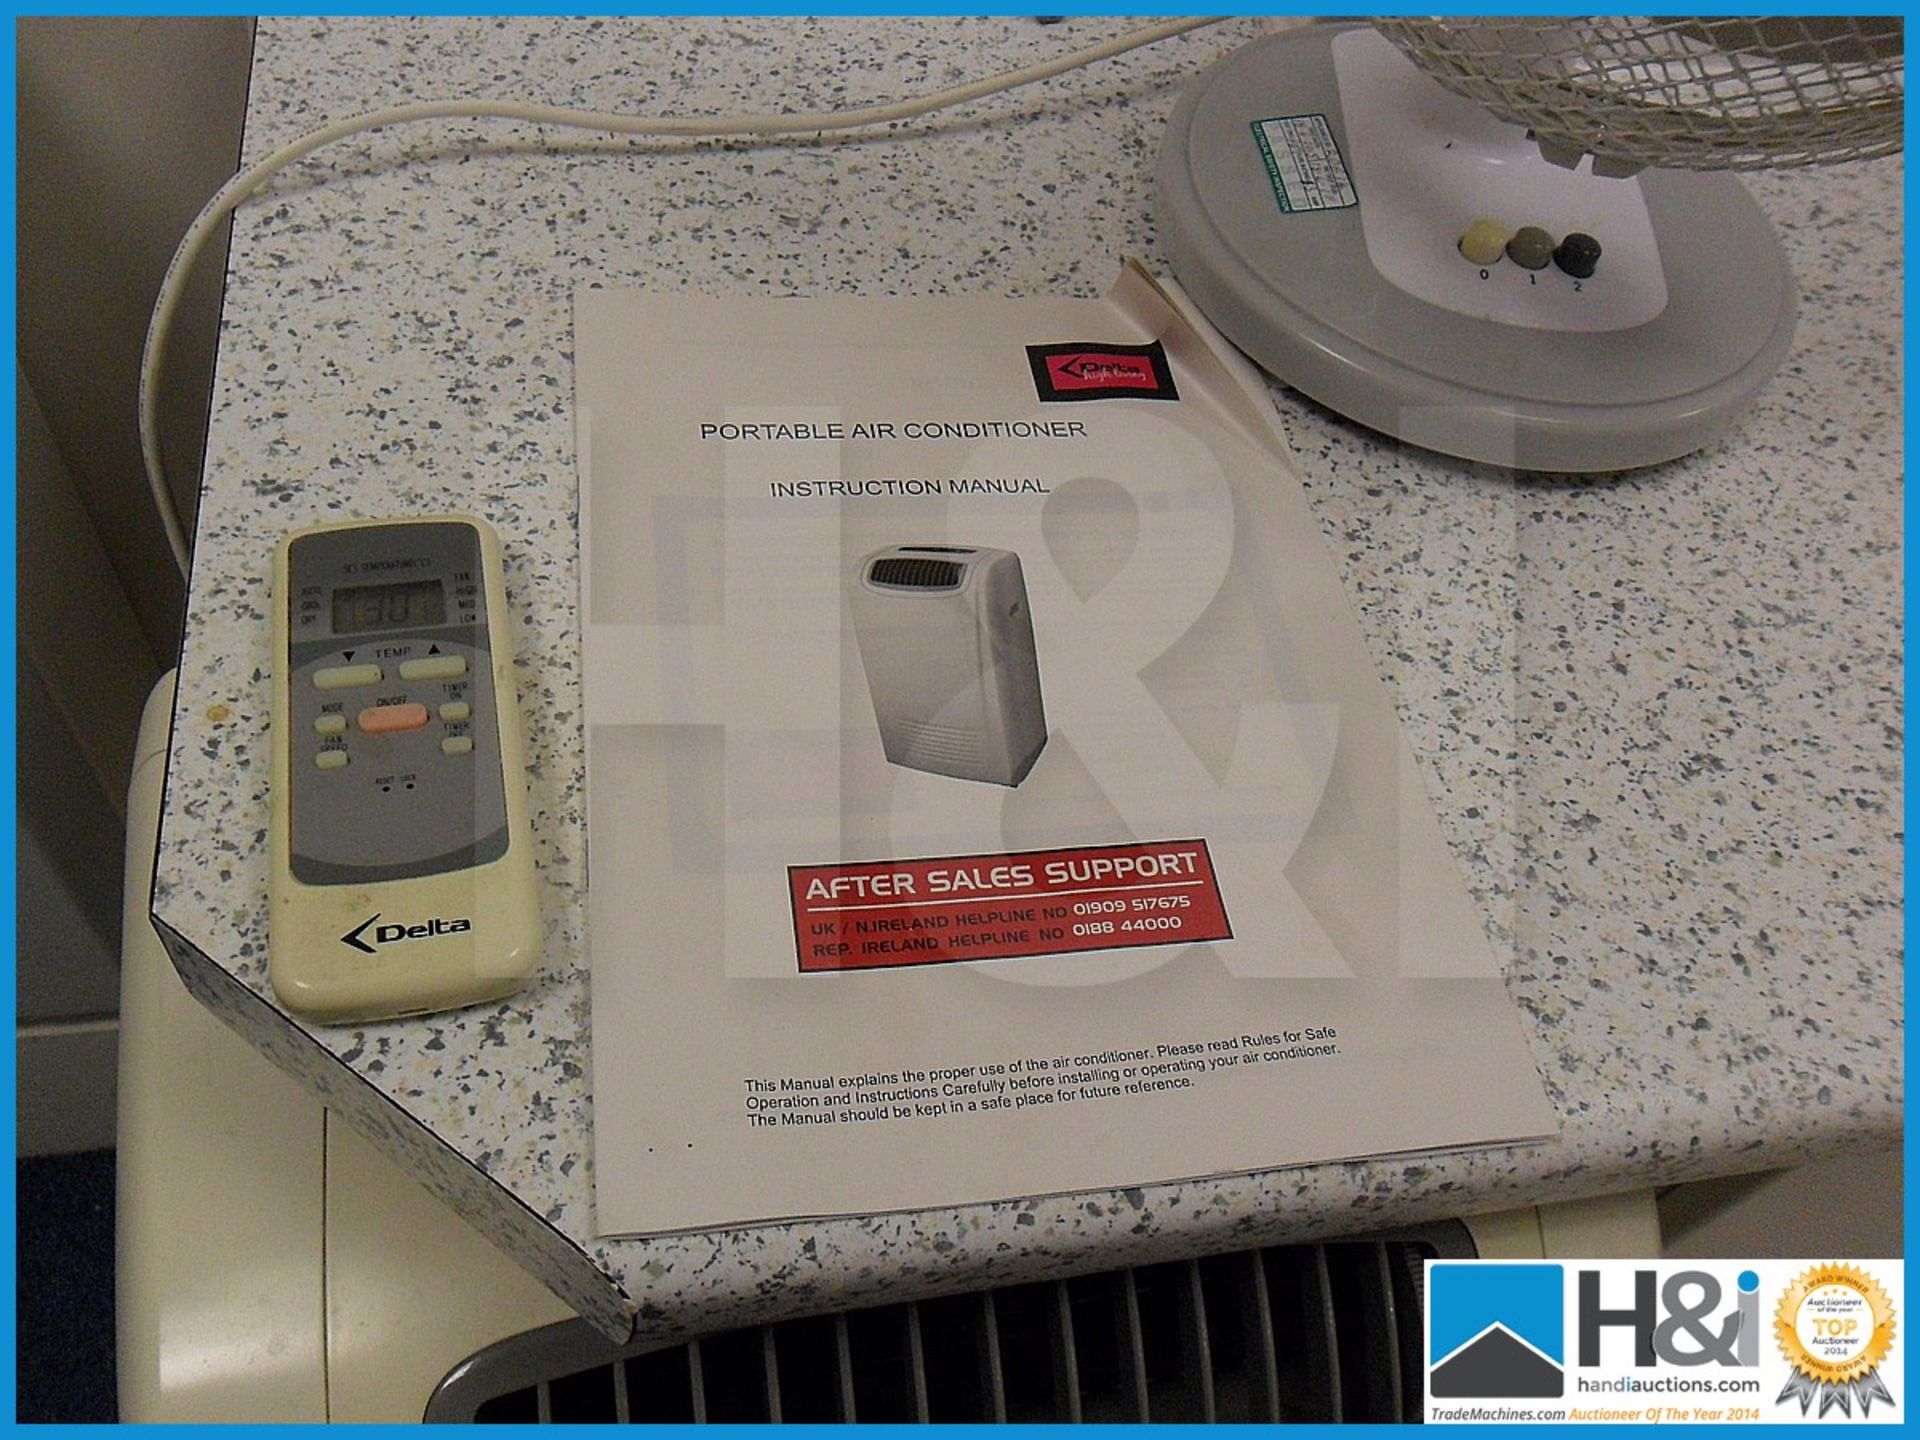 Delta air conditioning unit with remote and user manual plus desk fan. Tested - Image 2 of 2